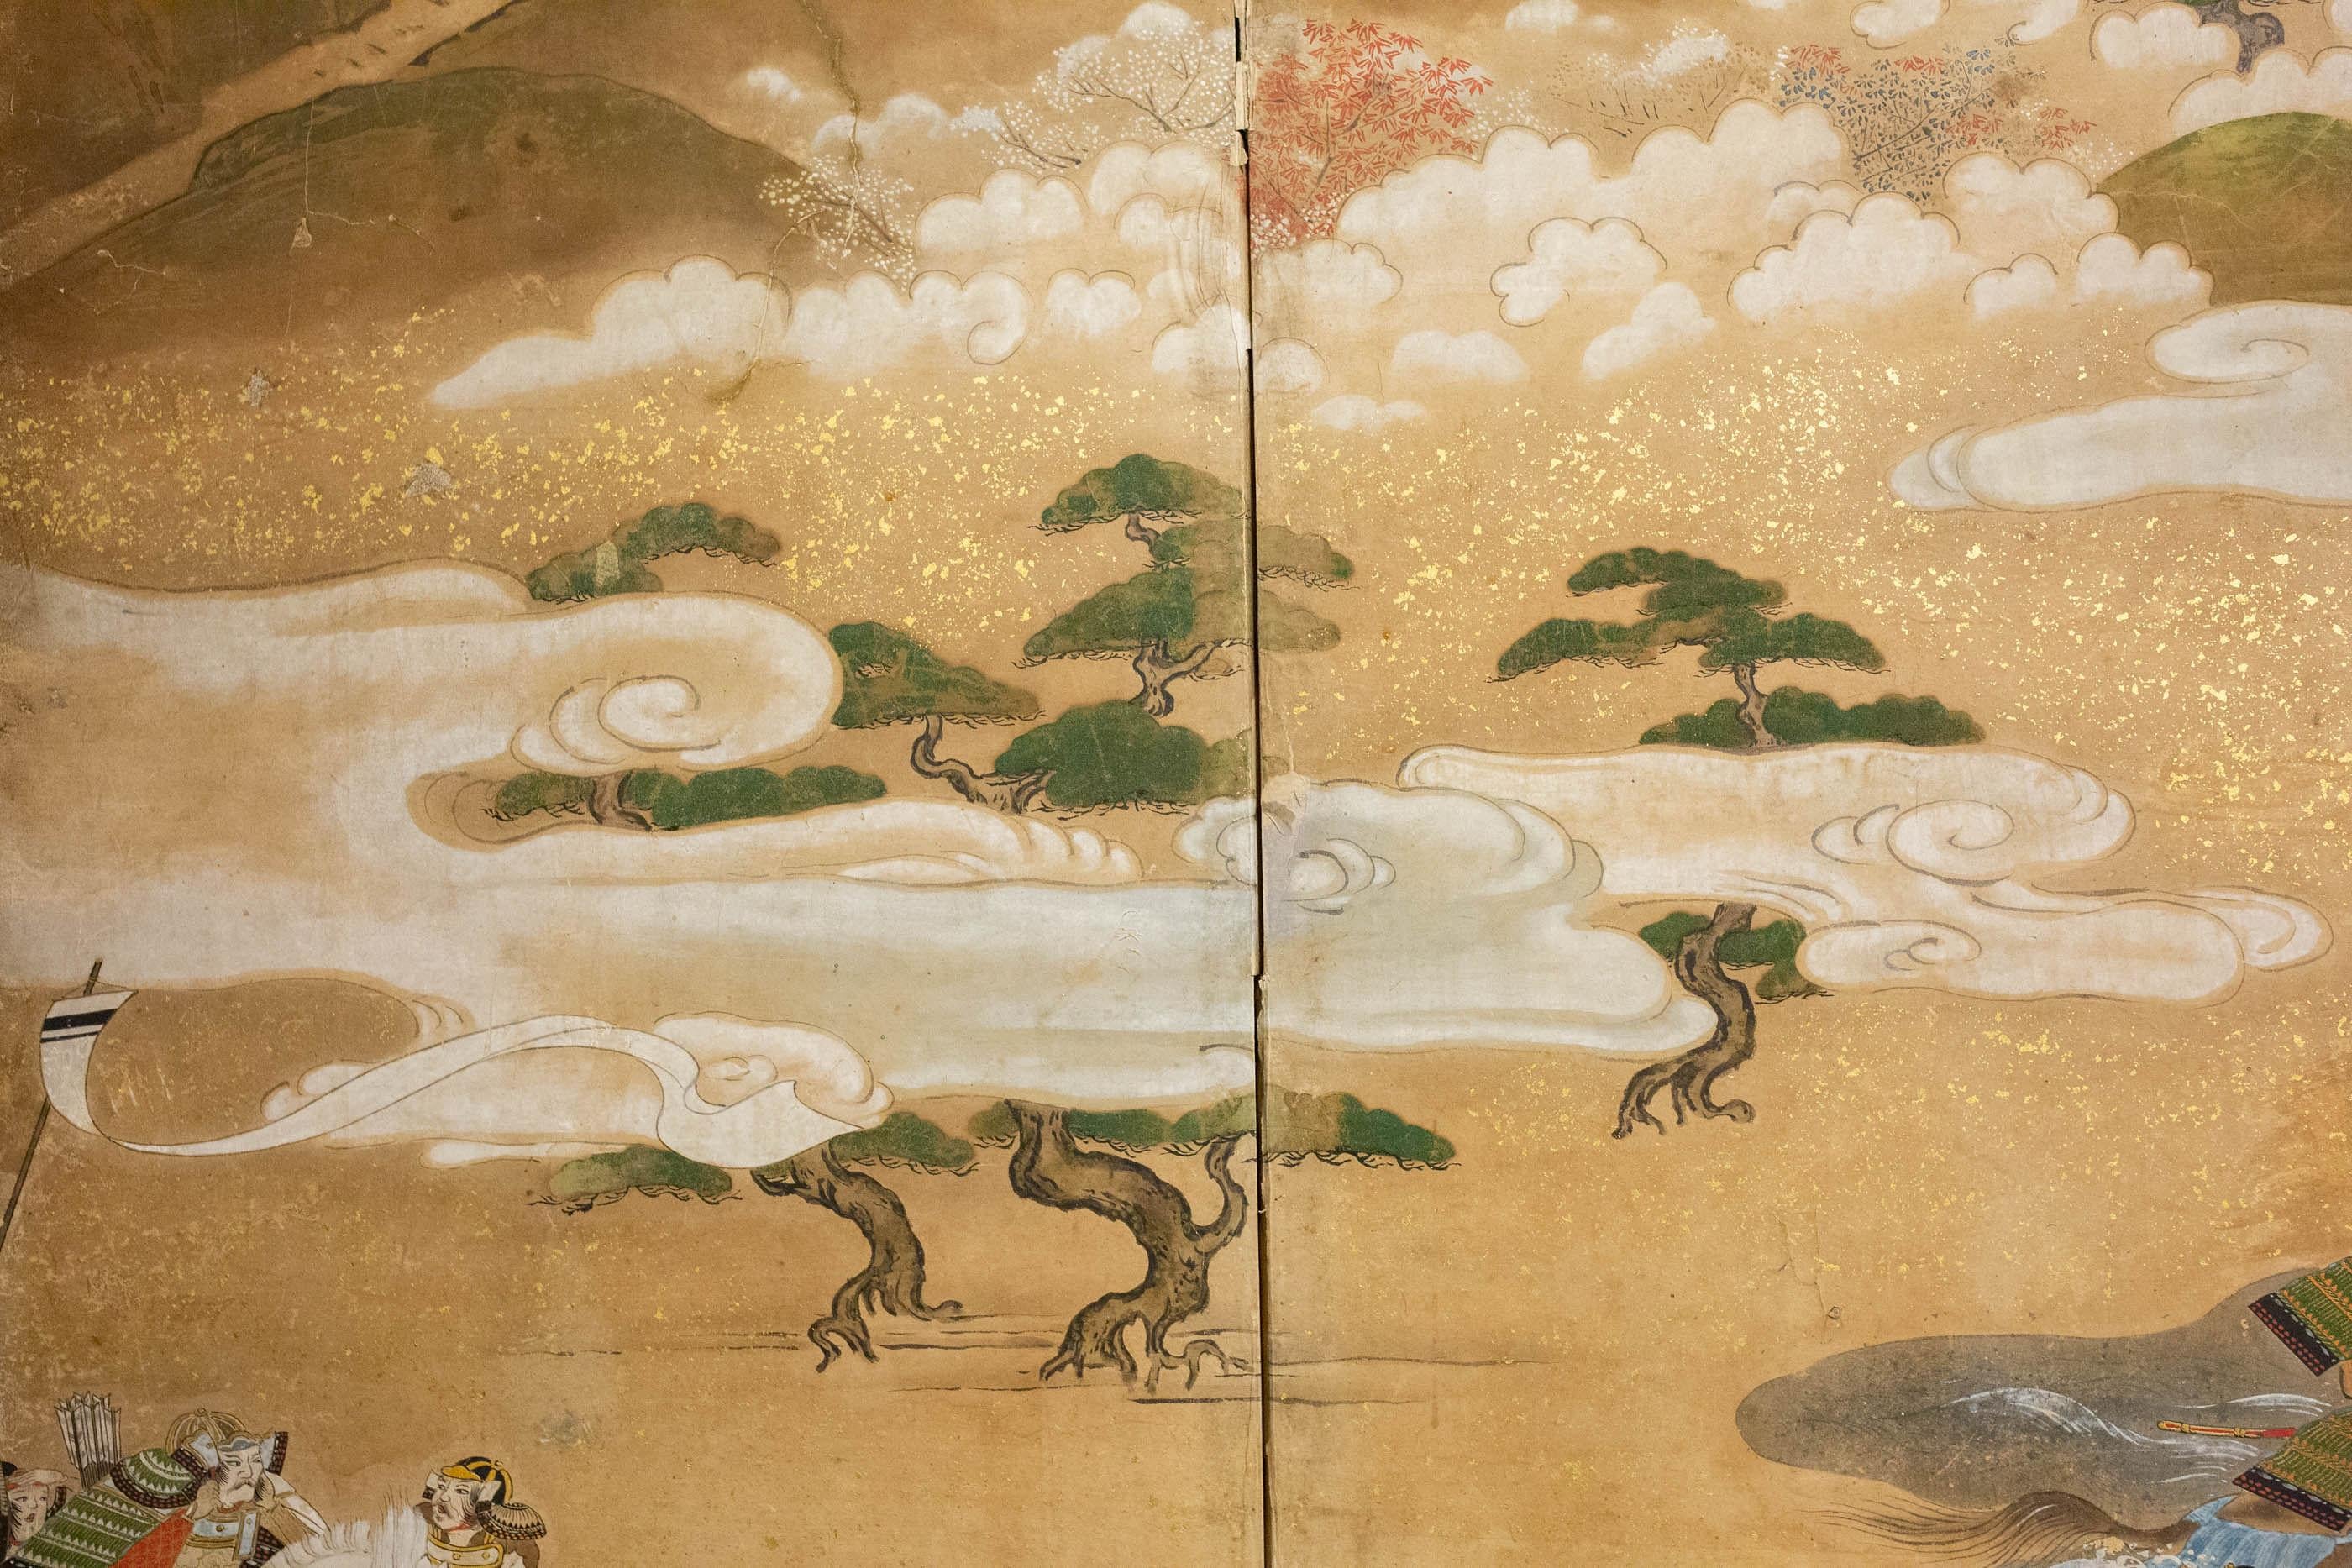 17th century painting depicting the Genji (white flags), driving the Heike (red flags) from Yashima (modern day Takamatsu). This screen features the famous warrior, Minamoto Yoshitsune, reaching for his bow fallen in the water. The warrior in the